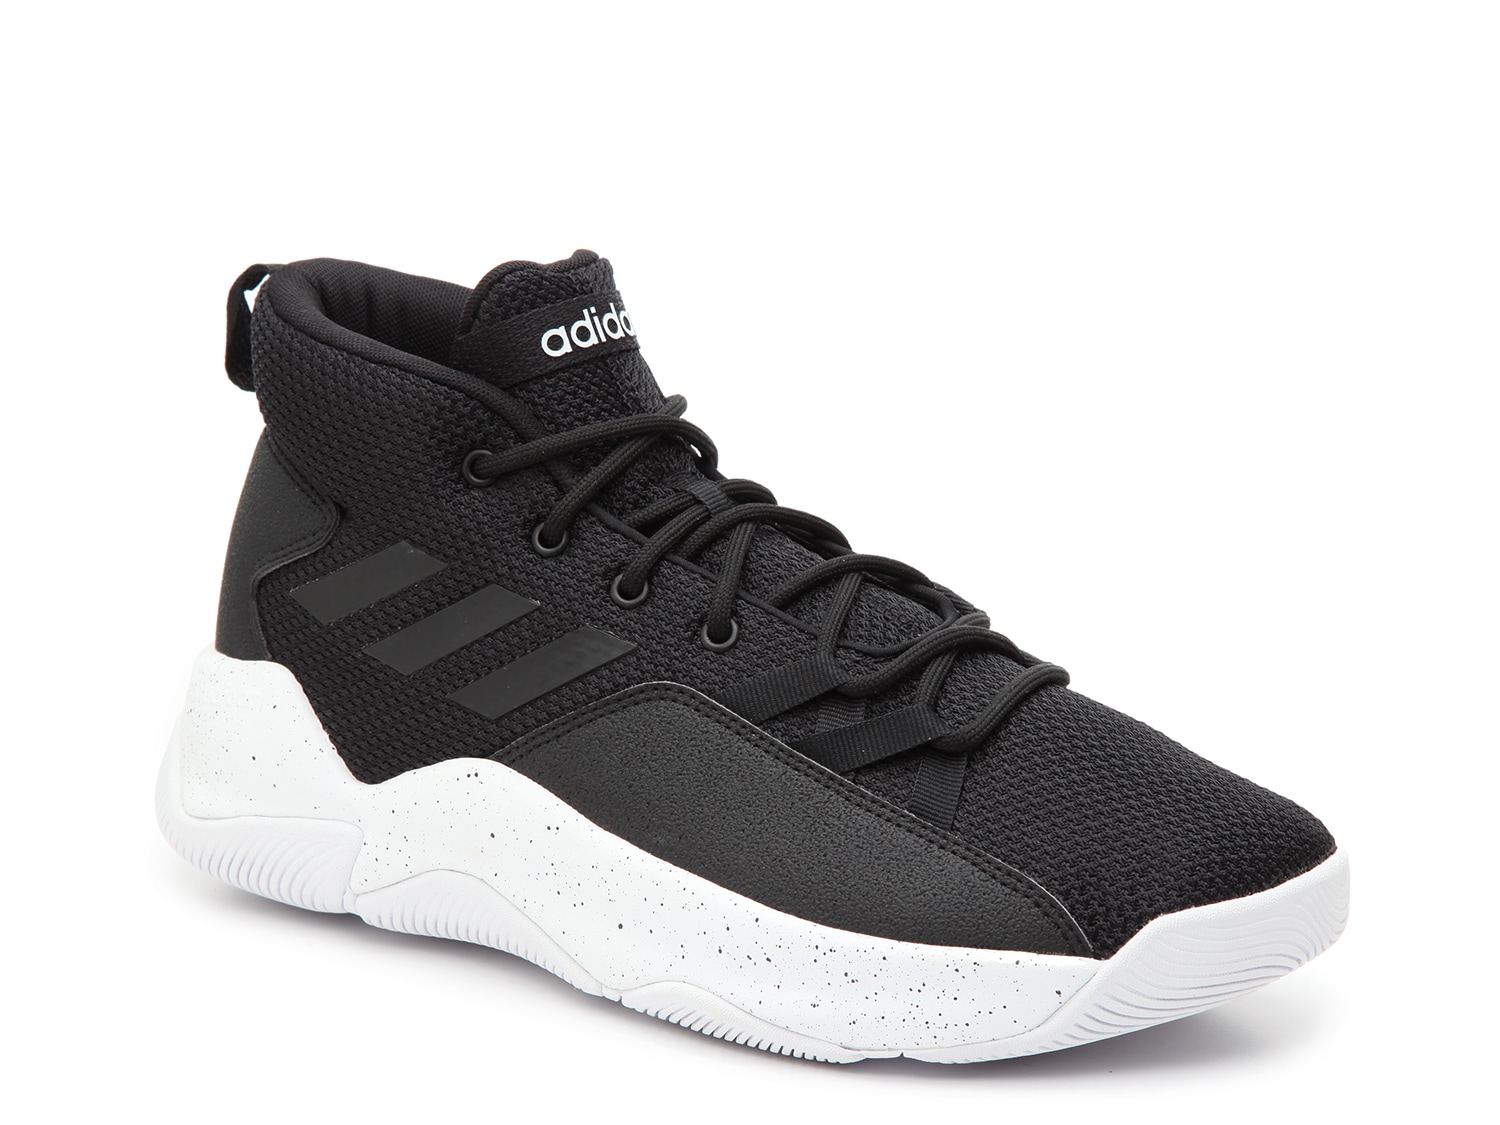 adidas streetfire basketball shoes review